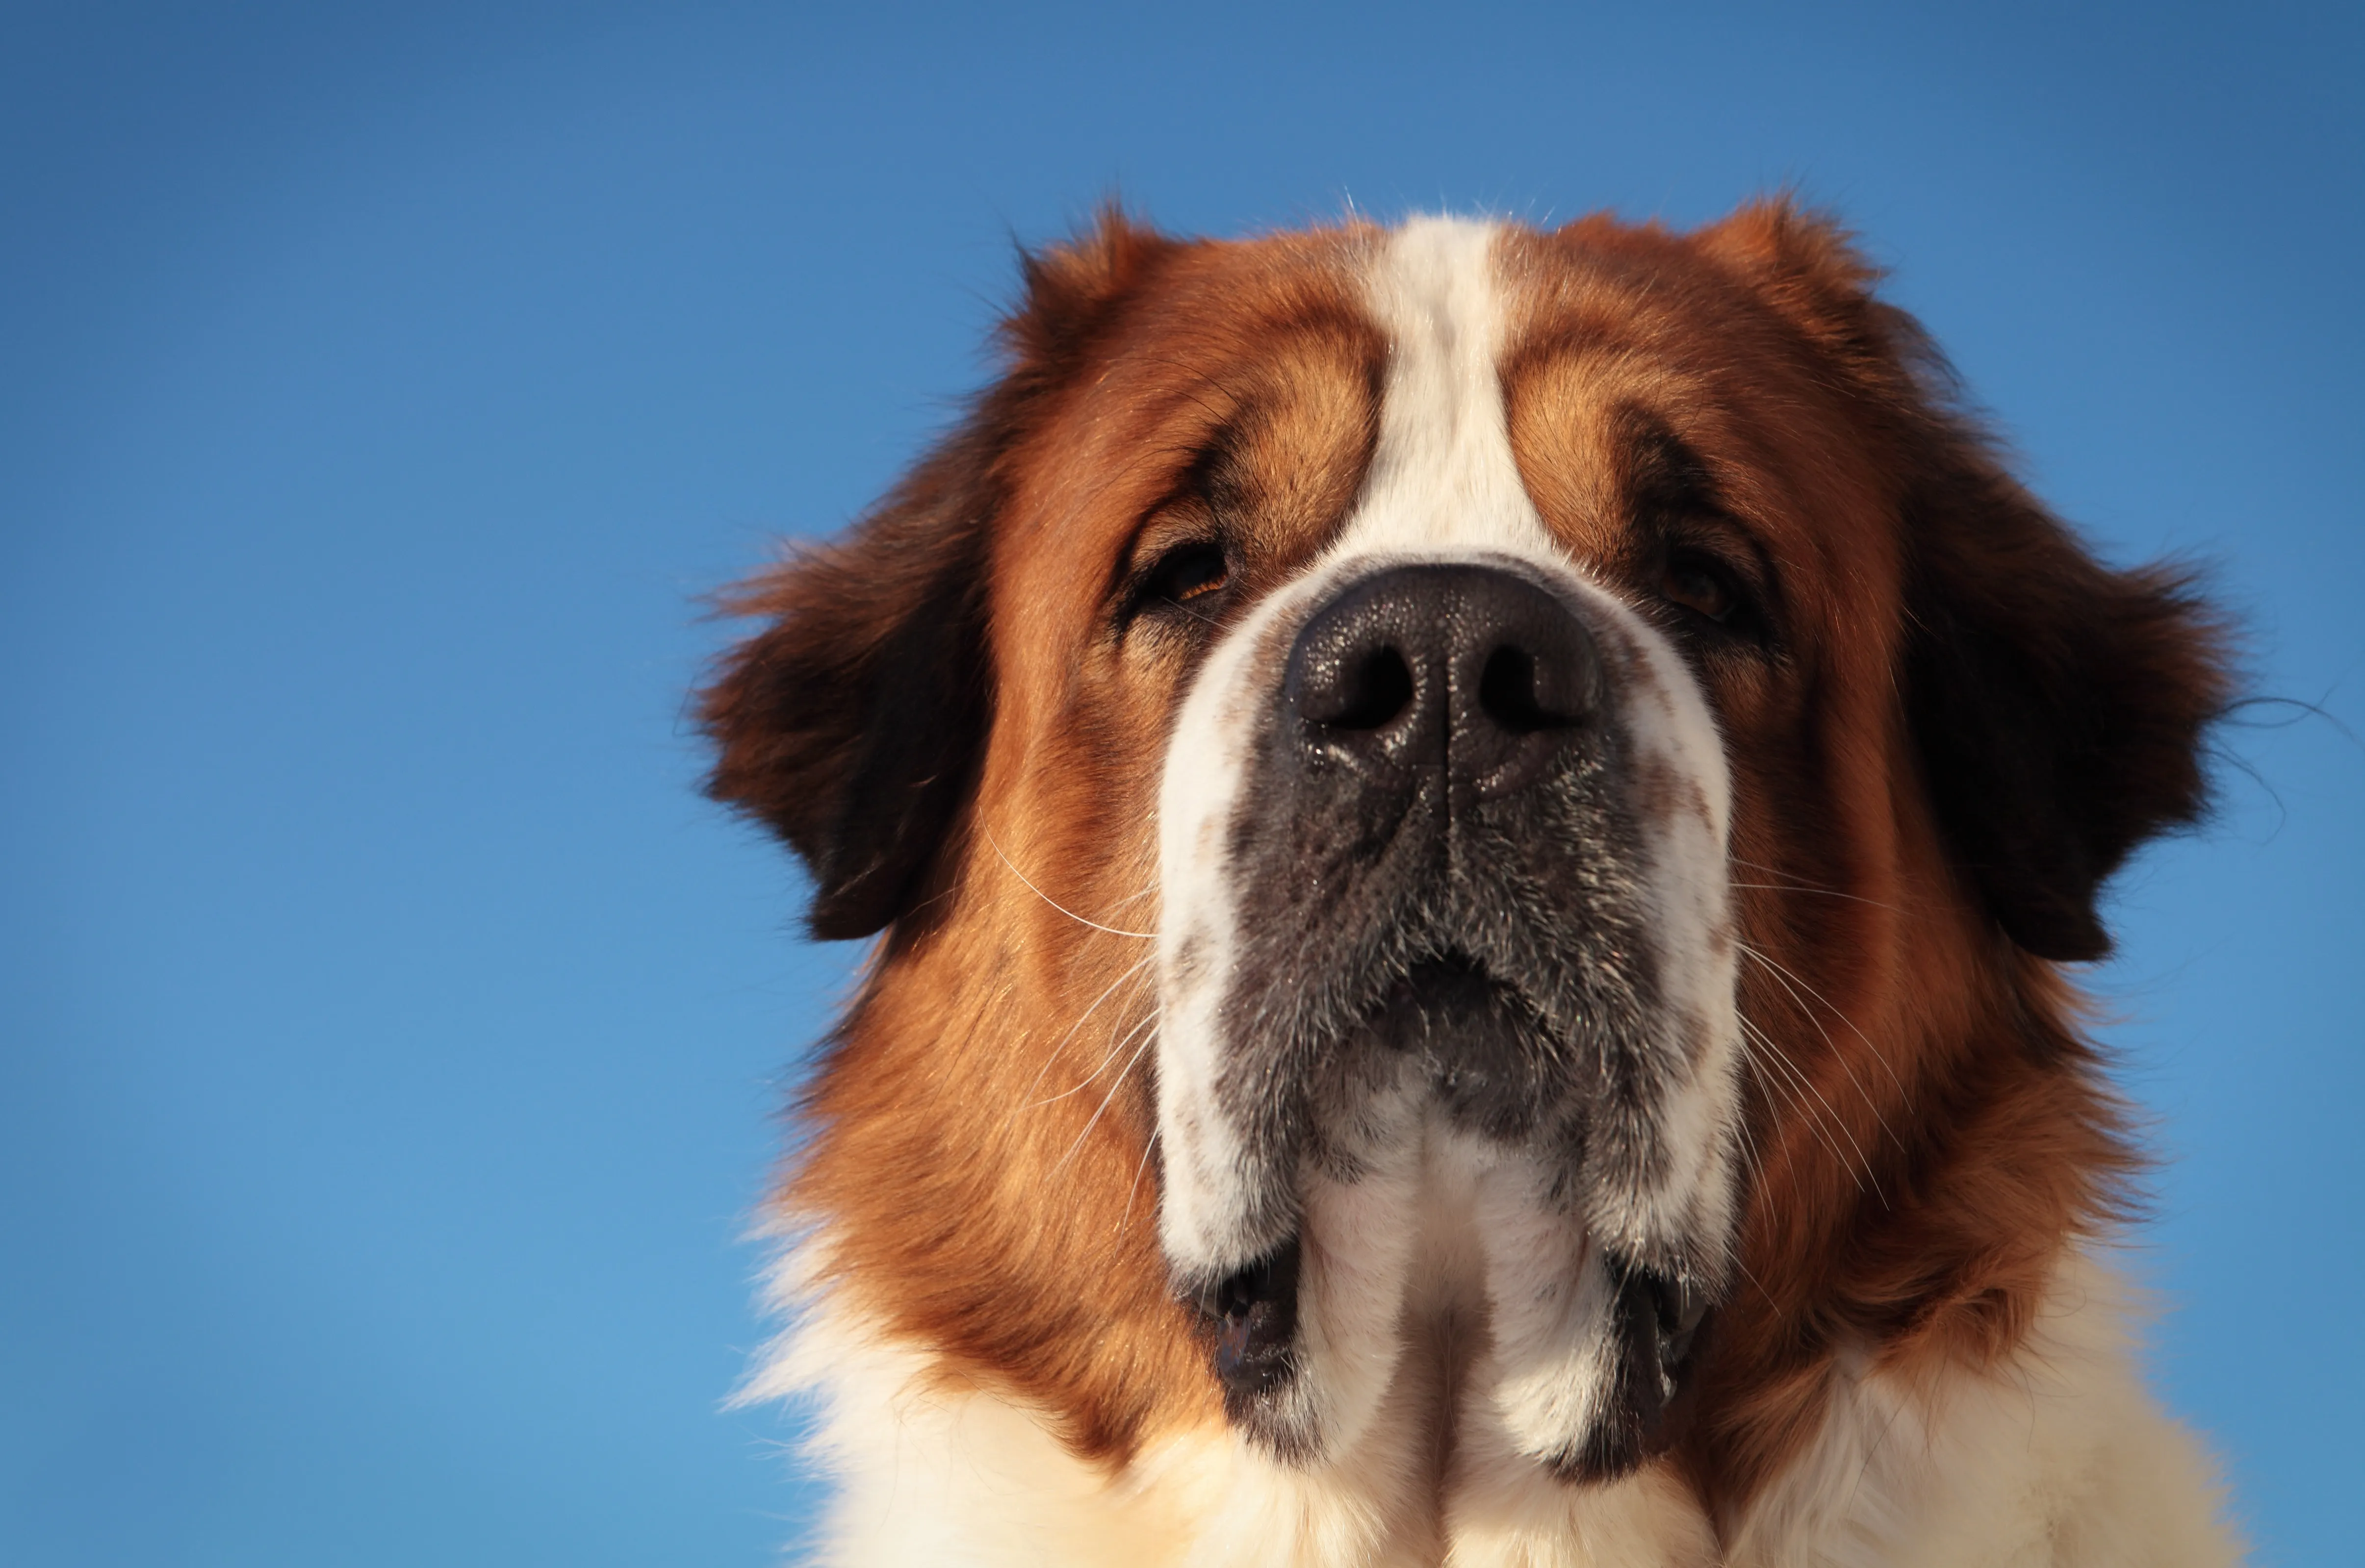 The world record for the heaviest dog belongs to a Saint Bernard named Benedictine. He weighed a whopping 357 pounds!